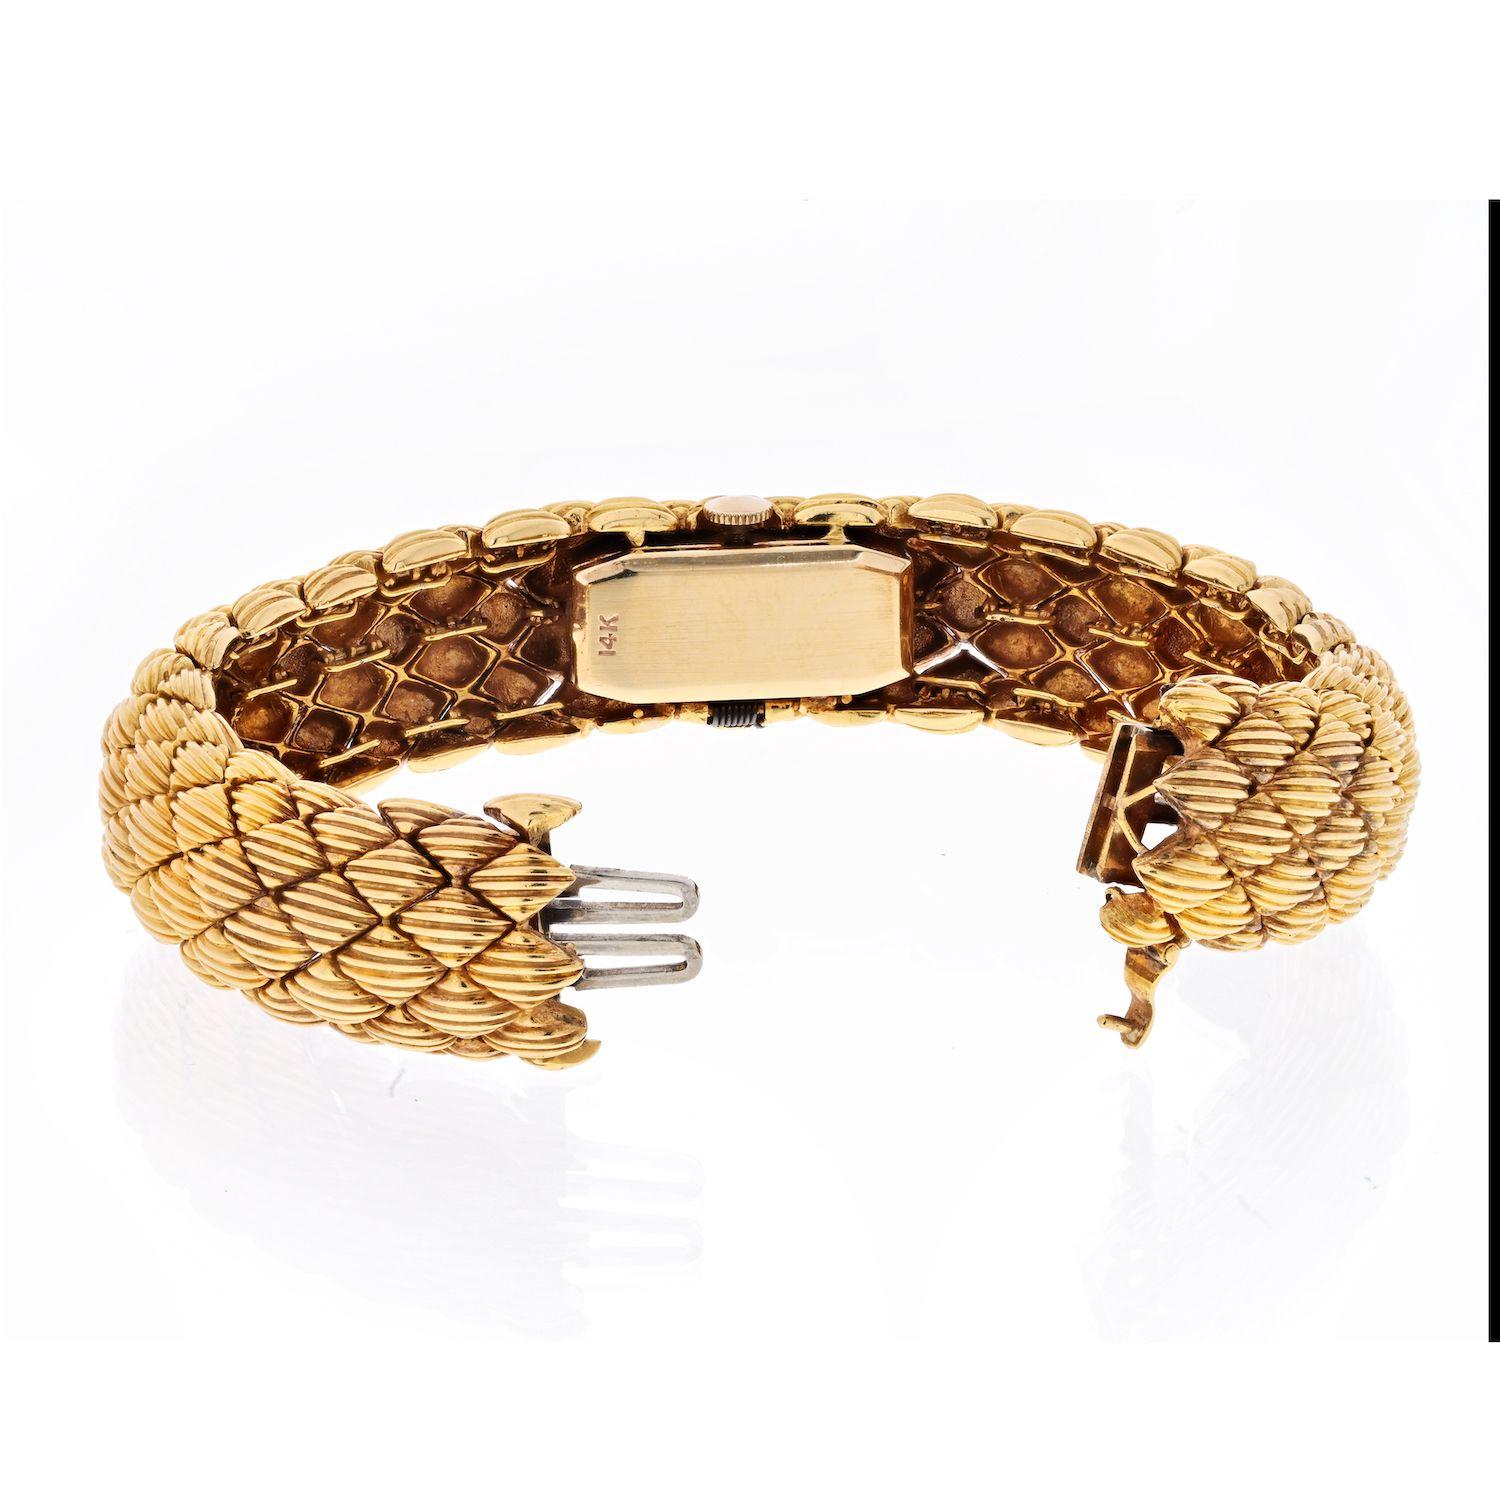 Incredible David Webb woven bracelet with a hidden watch.
This stunning piece is comprised of 18kt yellow gold with the watch components being made from 14kt. The bracelet is composed of finely ribbed diamond-shaped links, which conceals the watch